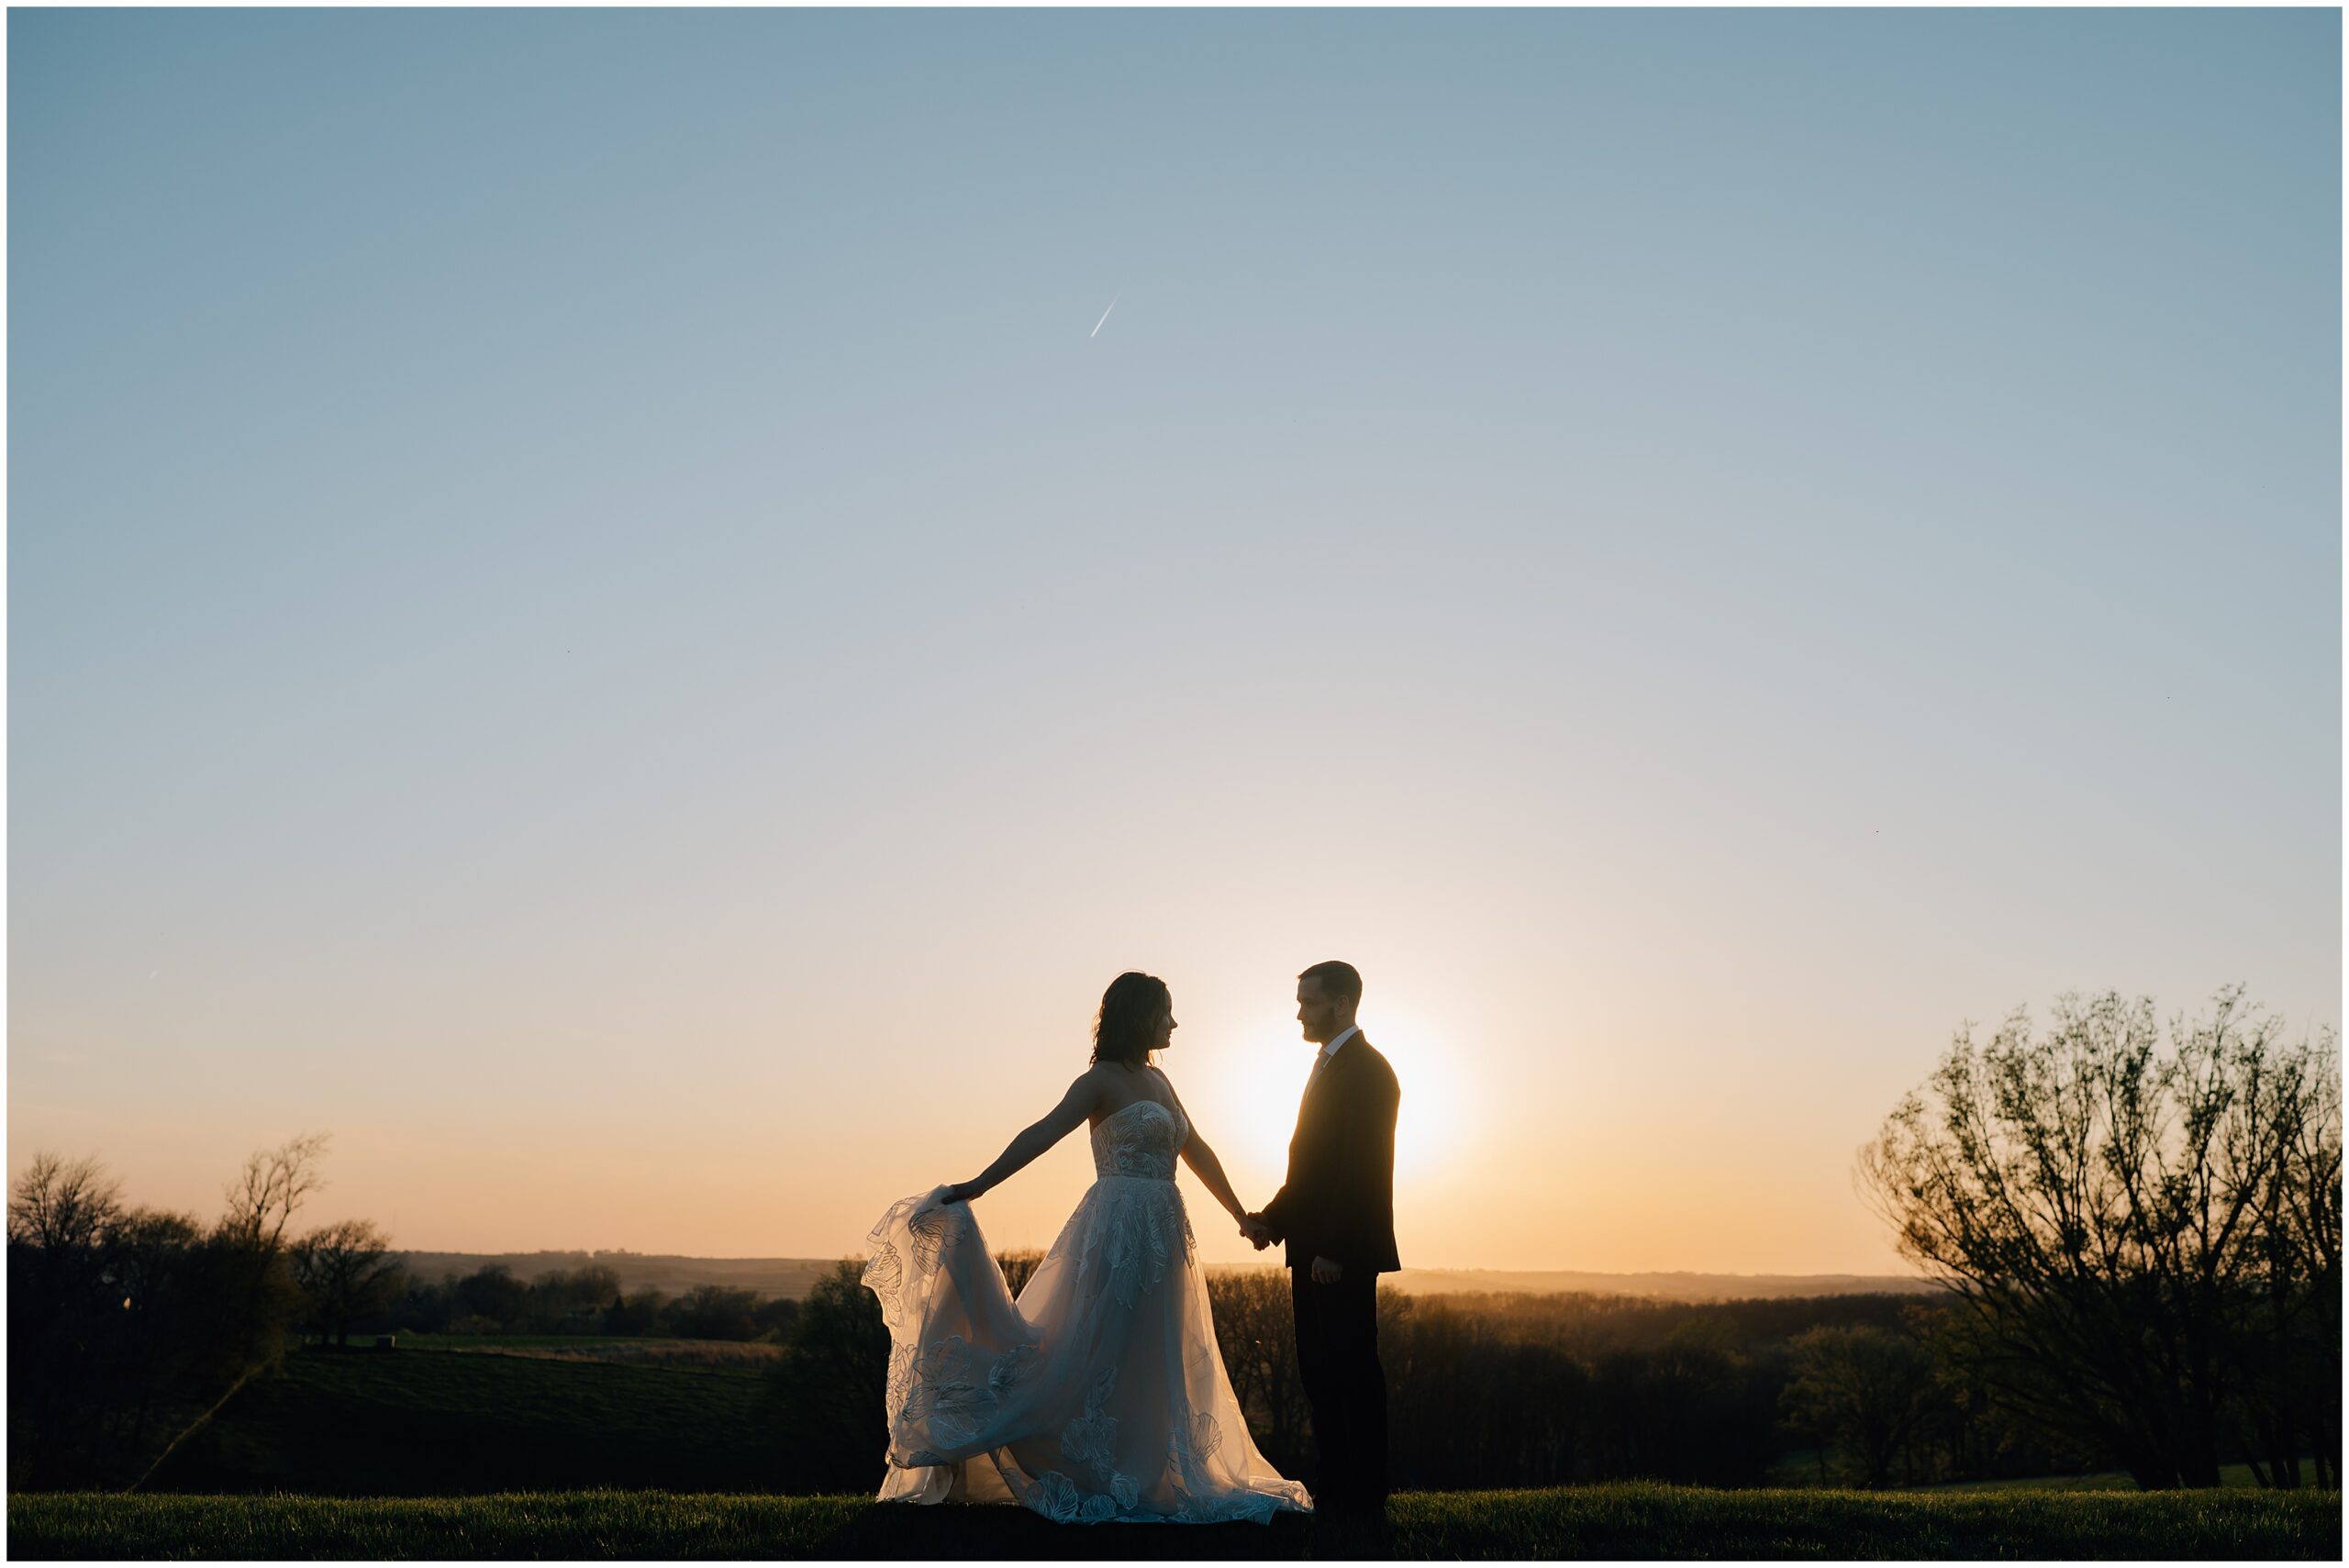 Bride and Groom dance while the sun sets behind them at The Stables at Copper Ridge, an Omaha wedding venue. Photo by Anna Brace, who specializes in Omaha NE Wedding Photography.